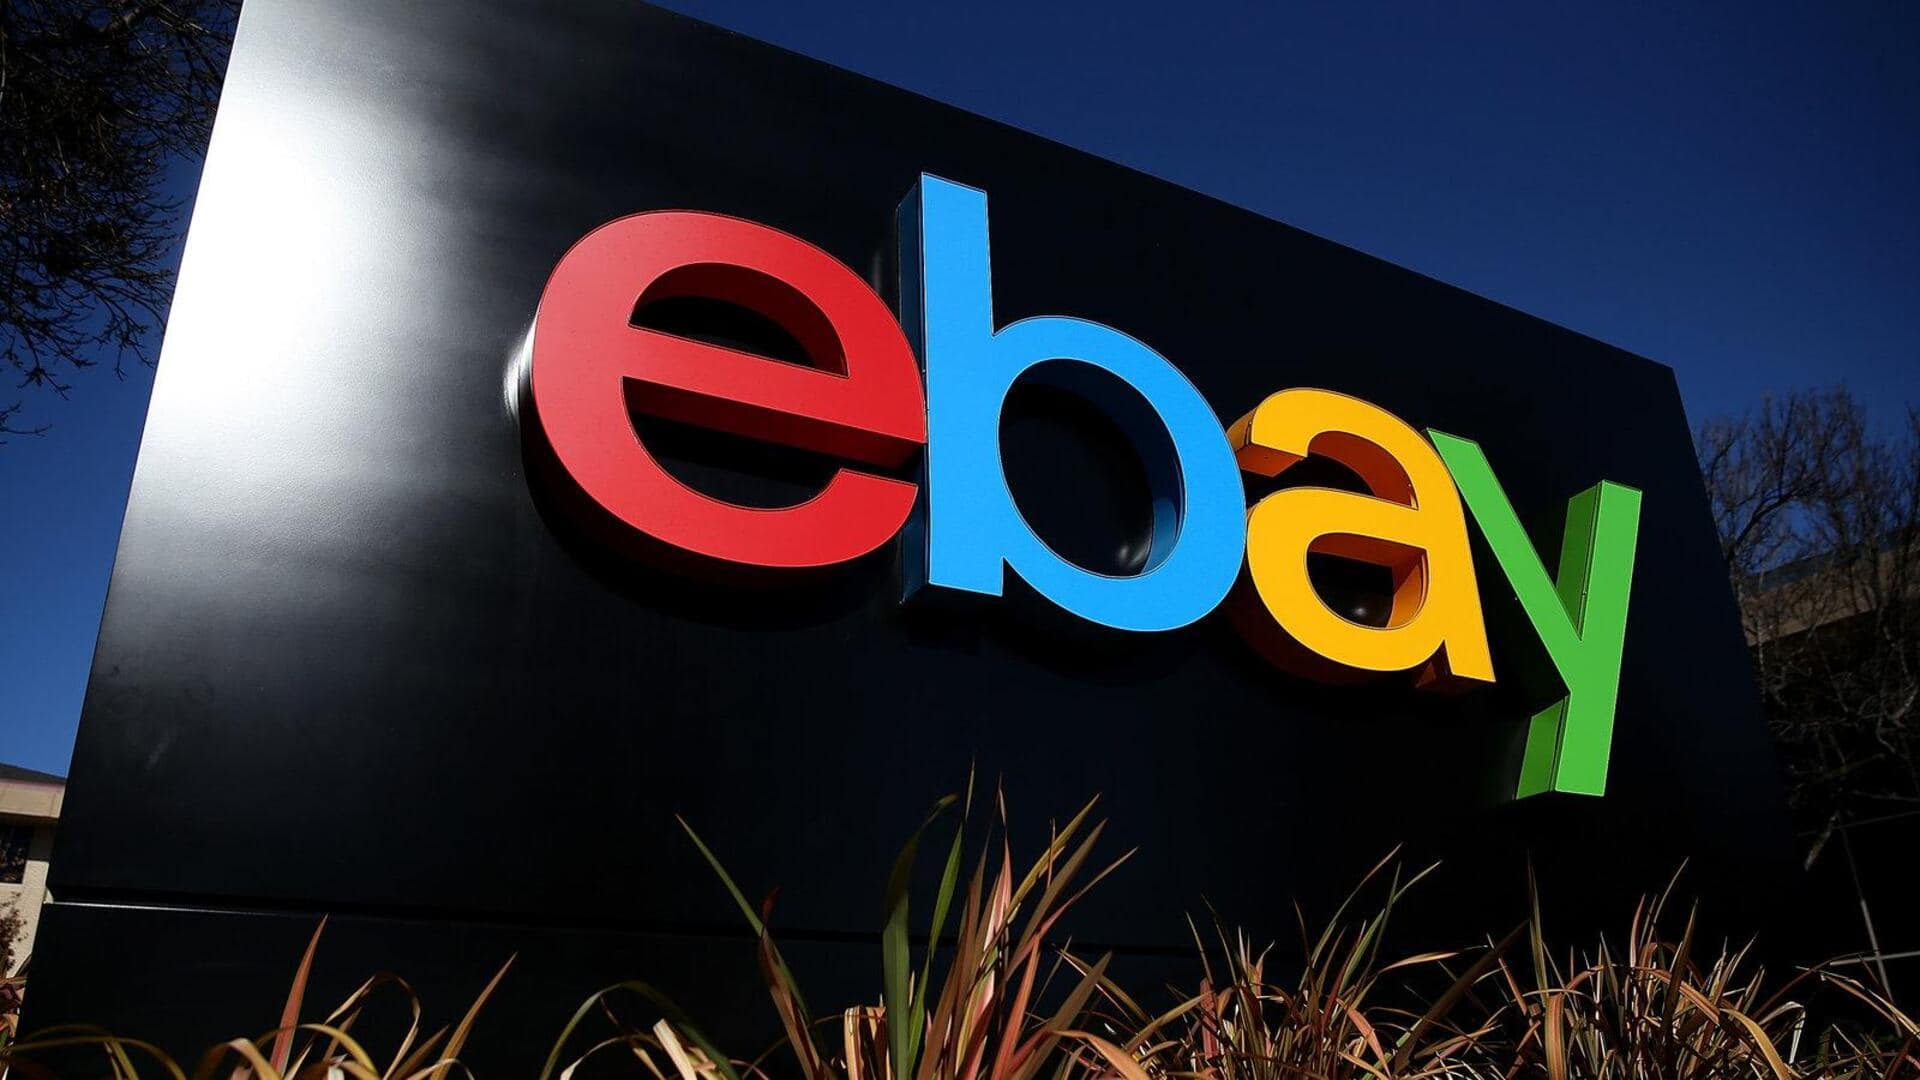 eBay fined $3mn after employees sent live cockroaches to couple